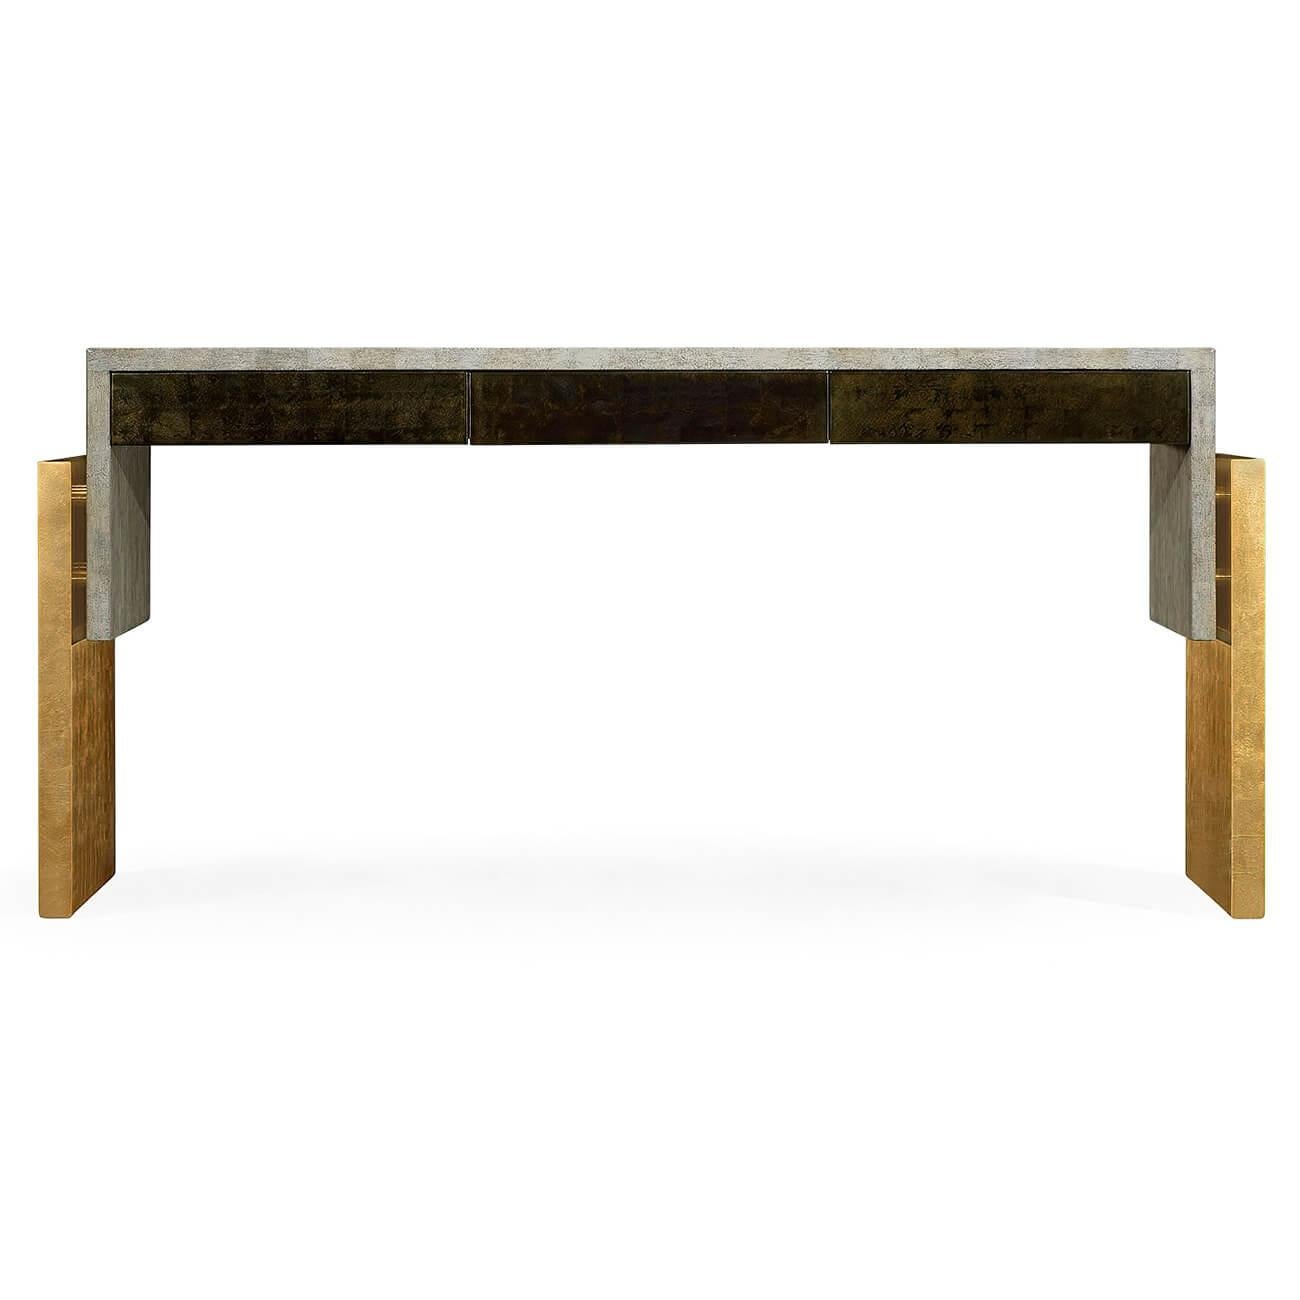 Modern console table with a floating top, the top finished in a bone eggshell with three drawers in a bronzed finish, supported by gilded sections.

Dimensions: 63 7/8